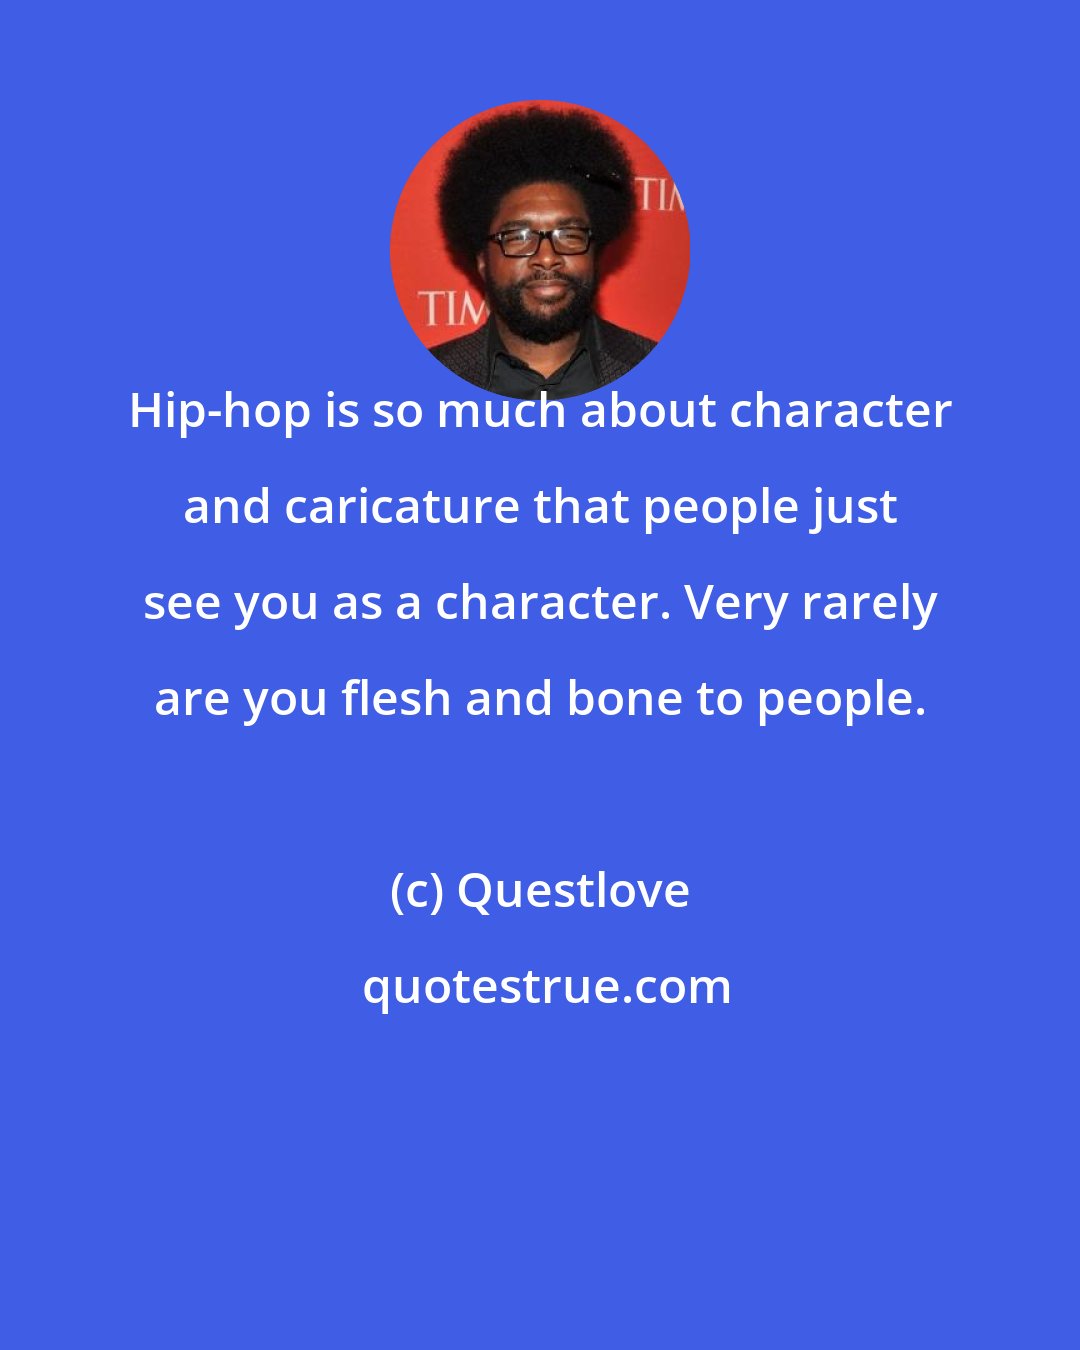 Questlove: Hip-hop is so much about character and caricature that people just see you as a character. Very rarely are you flesh and bone to people.